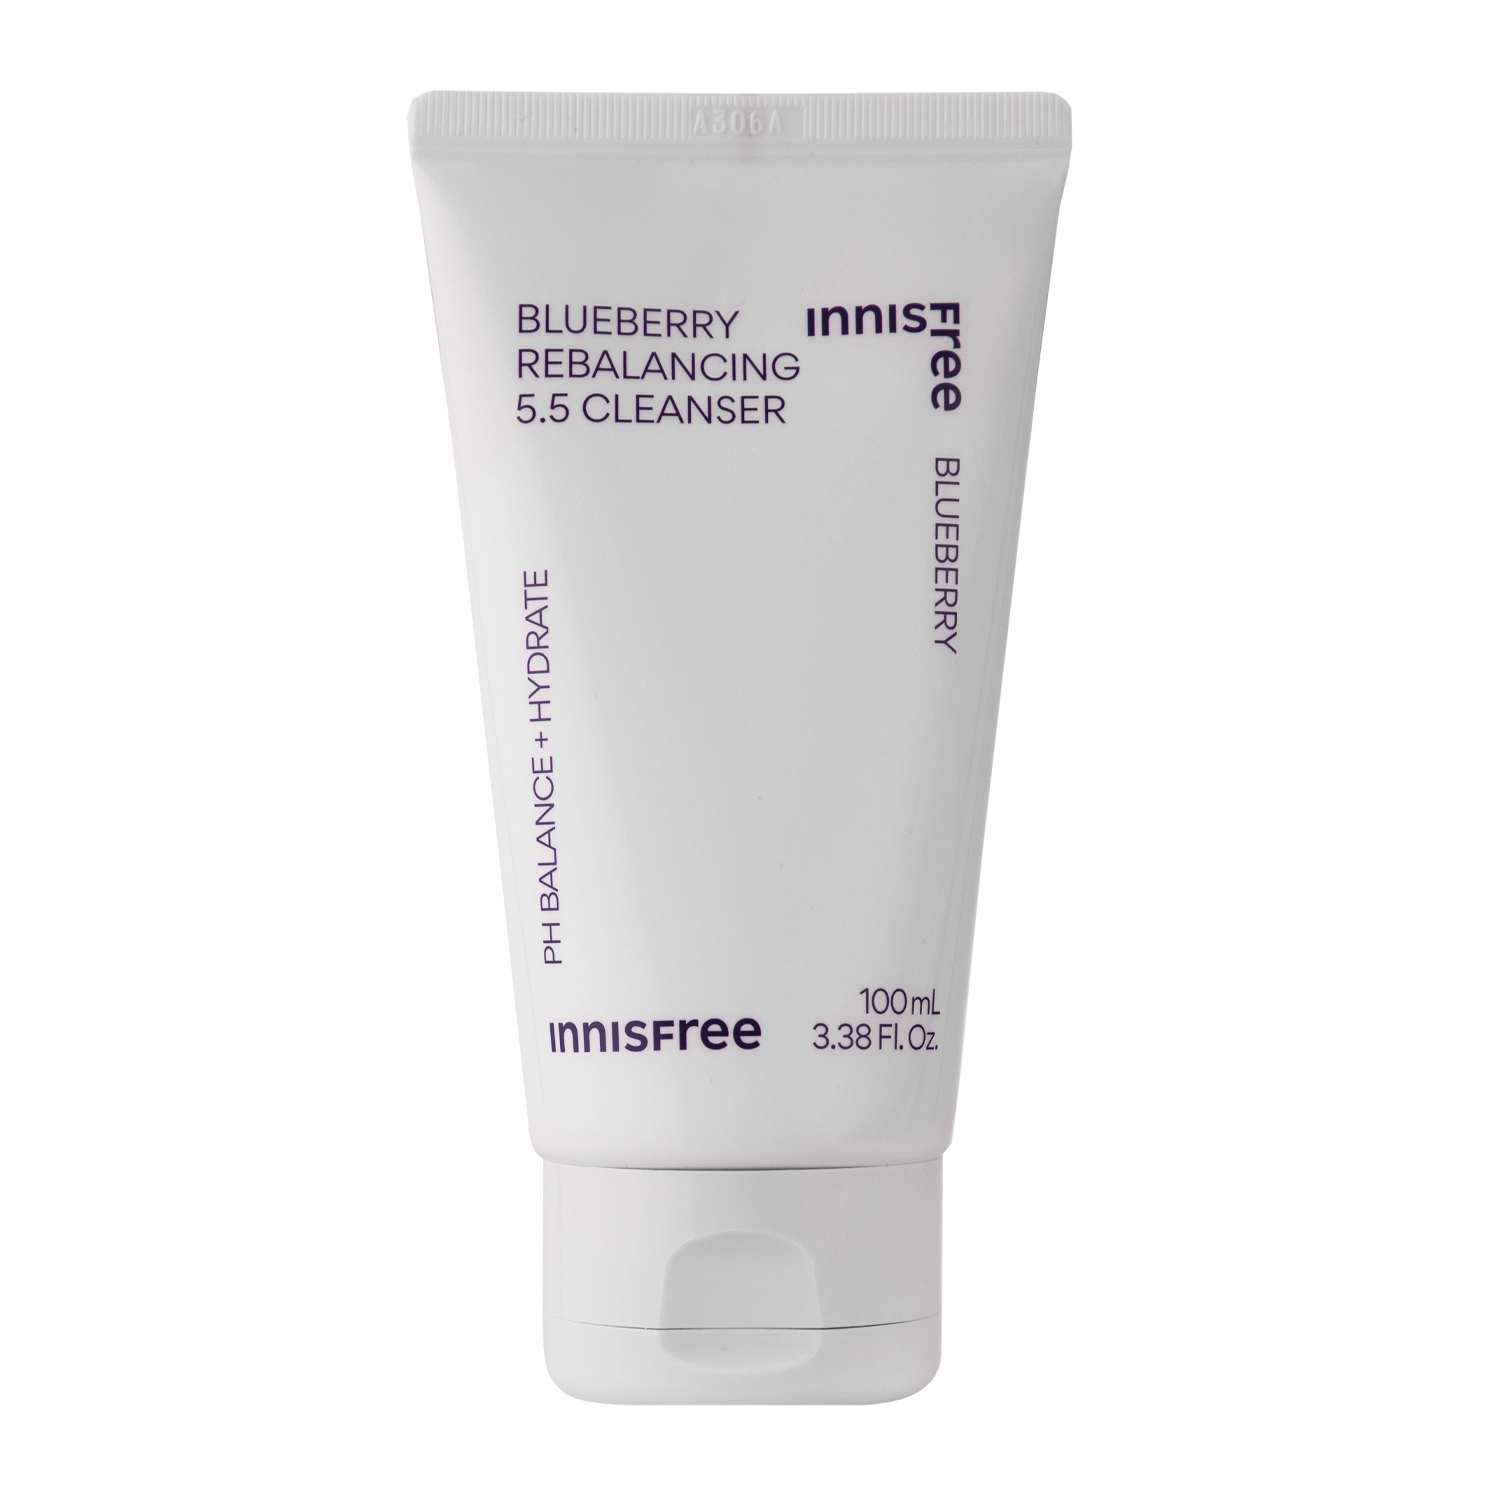 Innisfree - Blueberry Rebalancing 5.5 Cleanser - Balancing Face Wash Foam with Blueberry Extract - 100ml